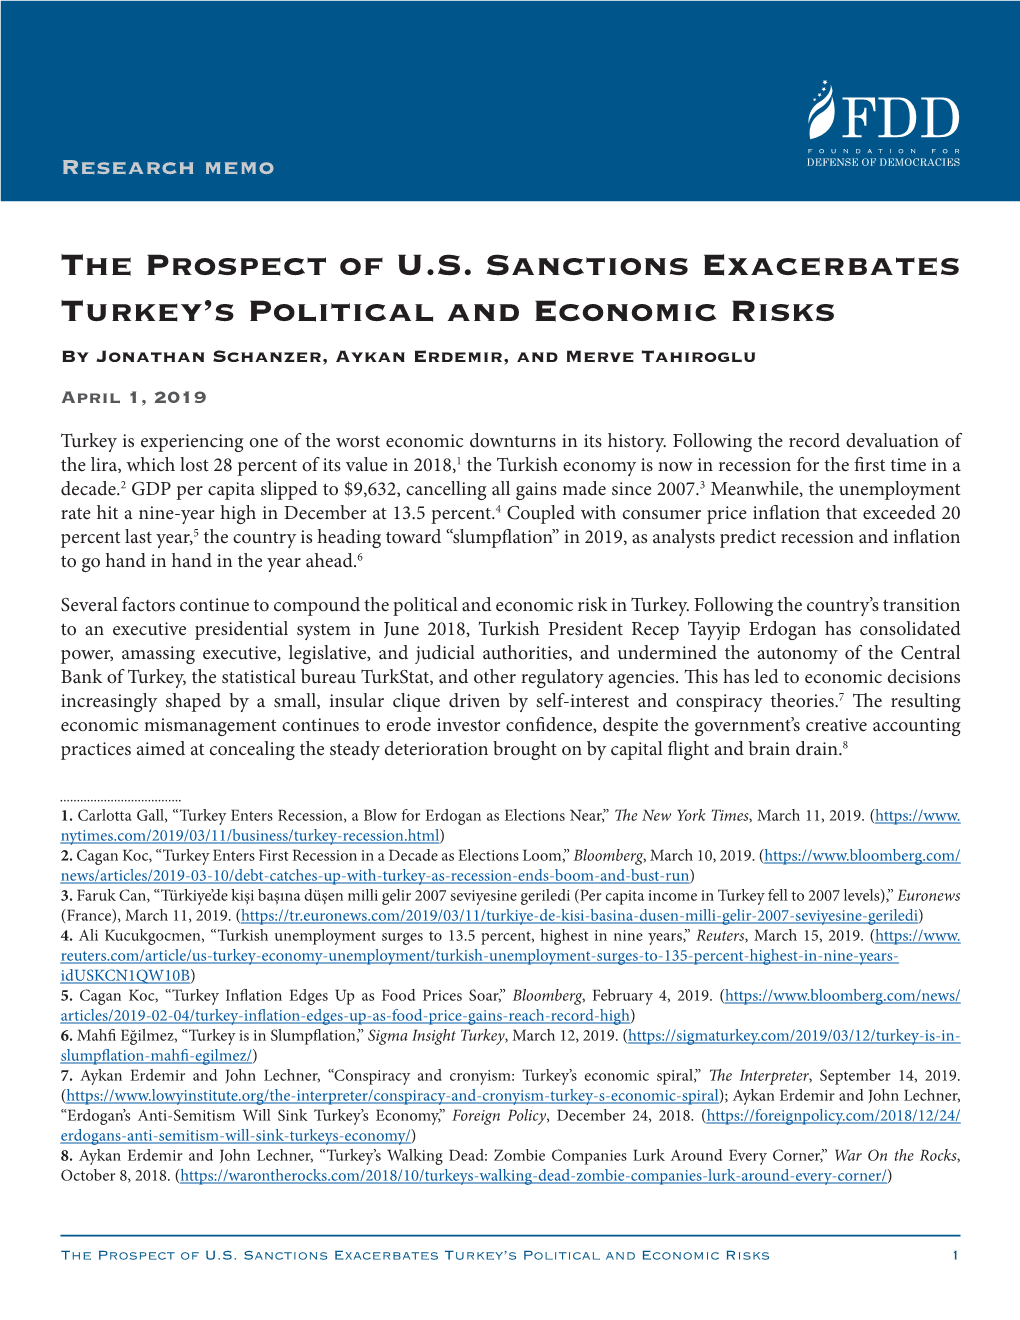 The Prospect of U.S. Sanctions Exacerbates Turkey's Political And